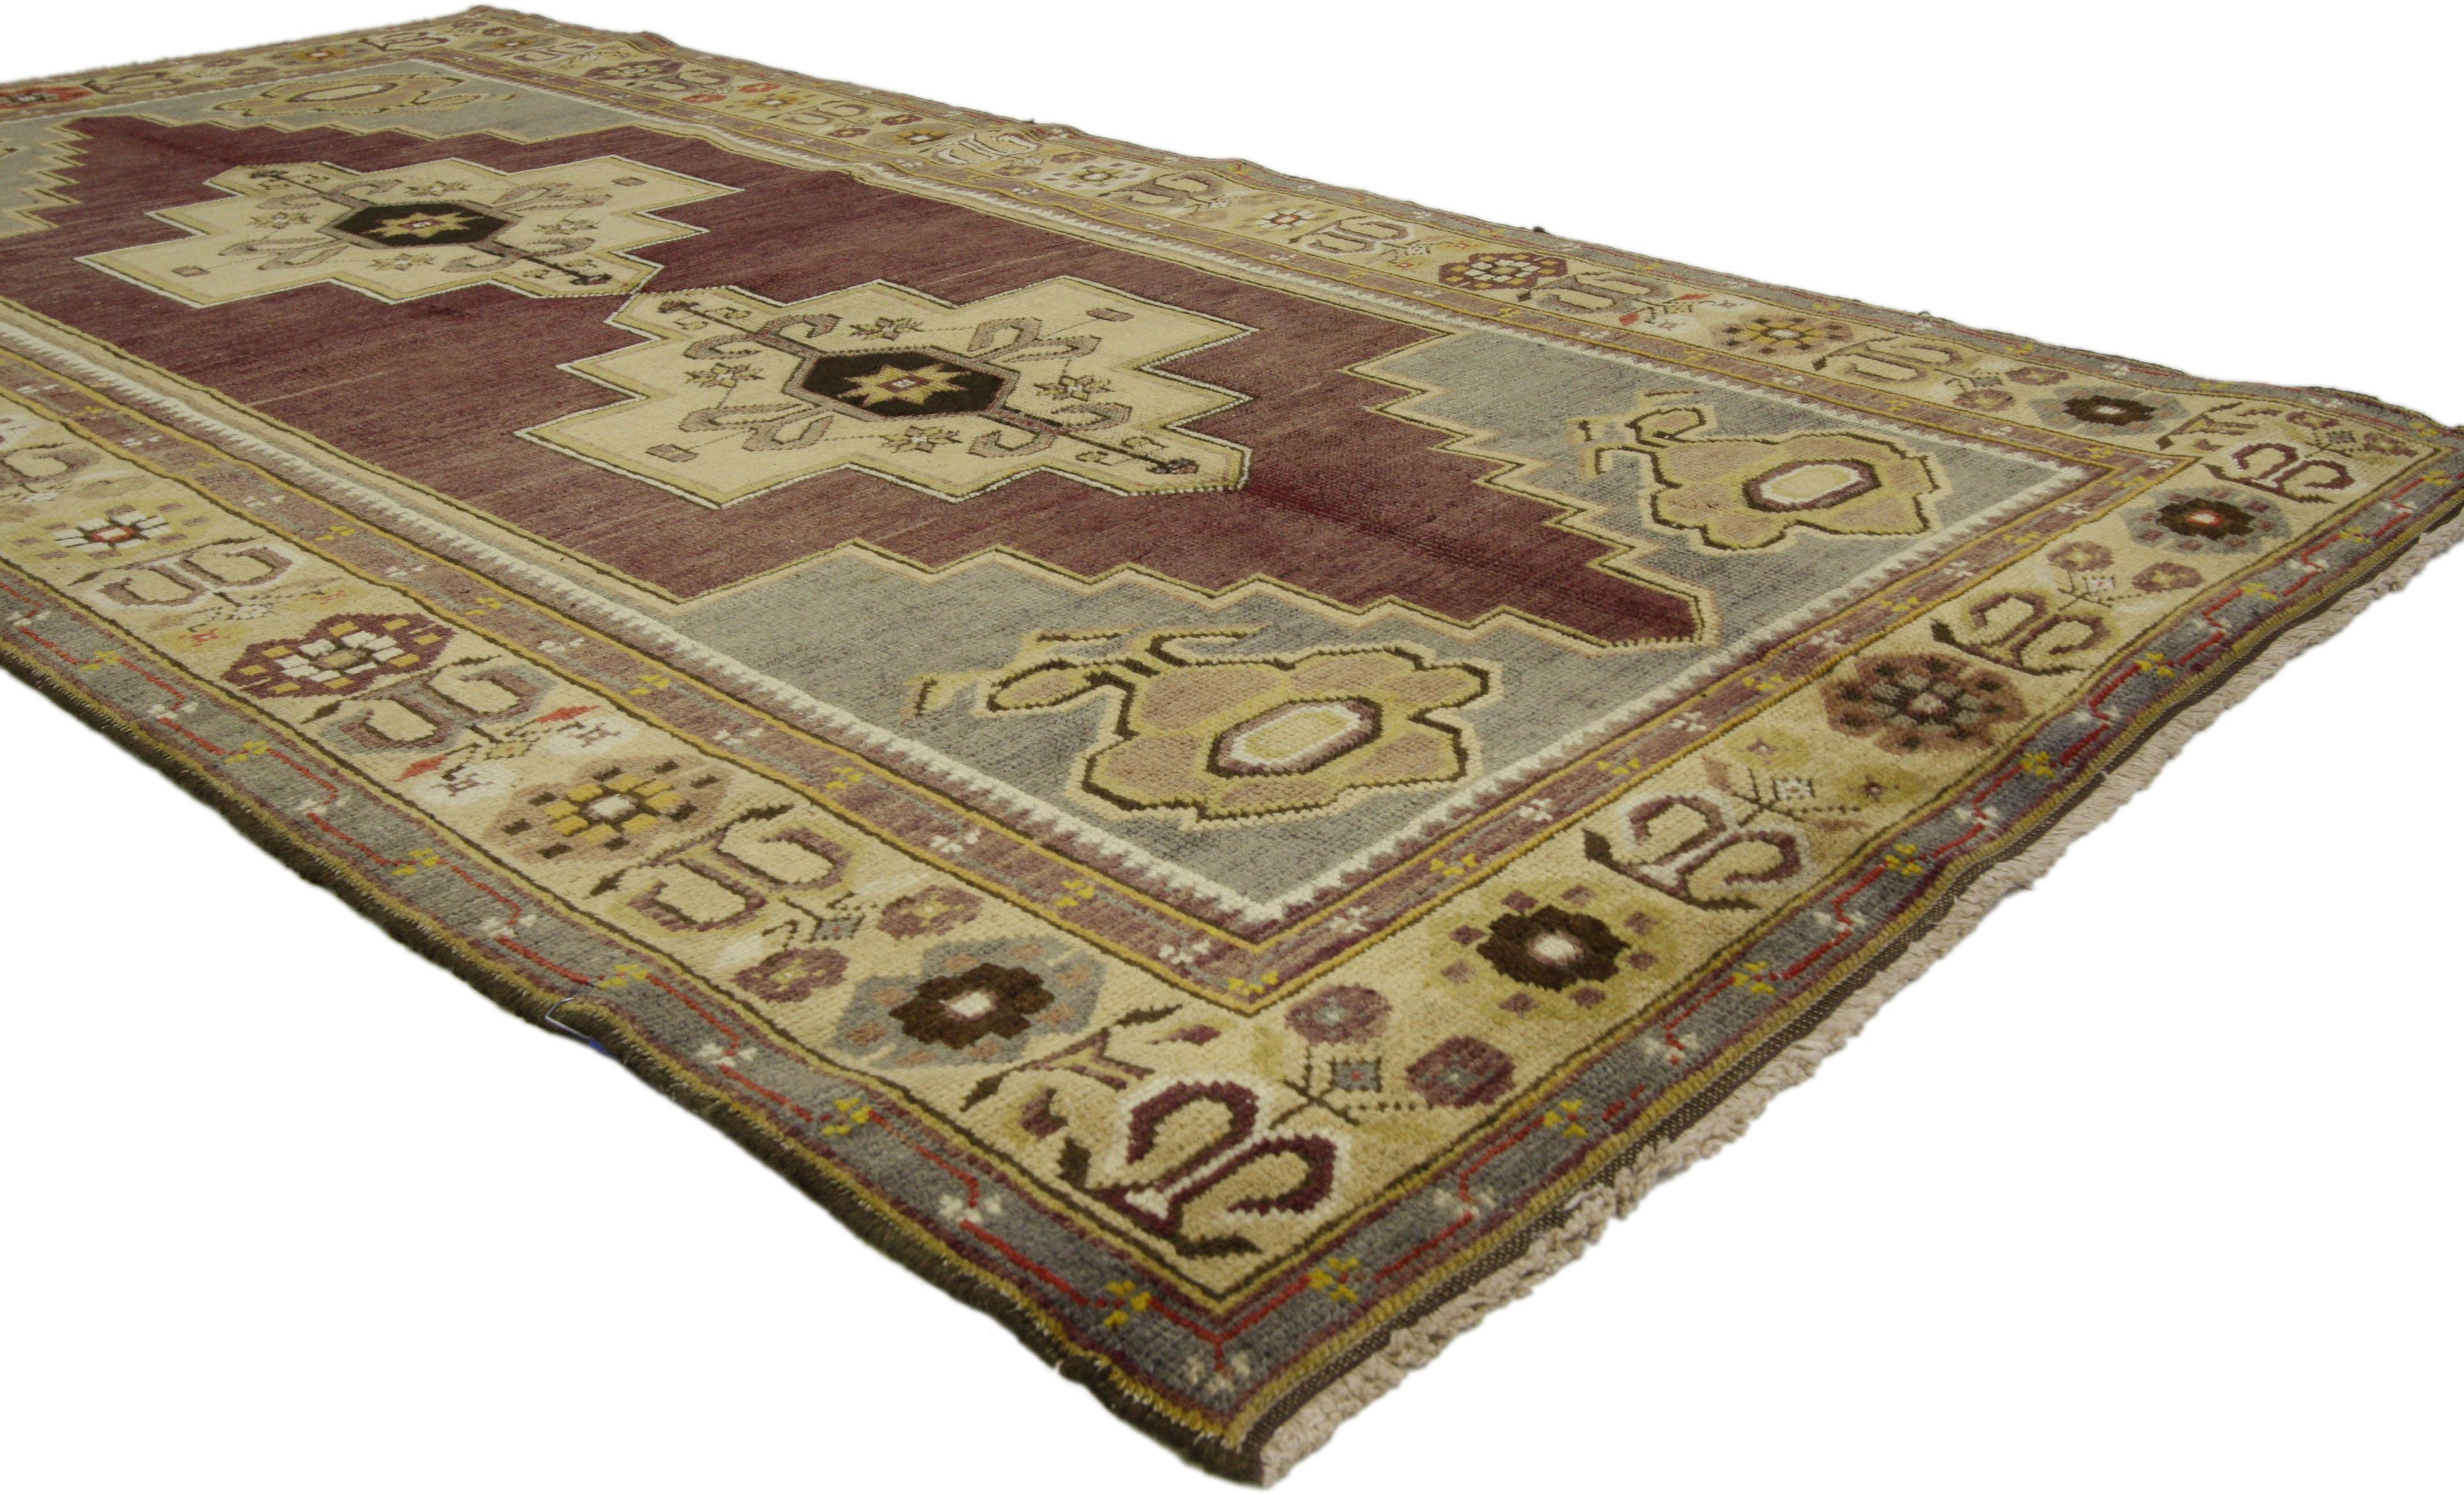 Vintage hand-knotted wool Turkish Oushak rug with traditional modern style featuring a double geometric medallion in an open abrashed field surrounded by a tribal motif border. Color palette consists of plum, gray and beige. Perfect for a hall or